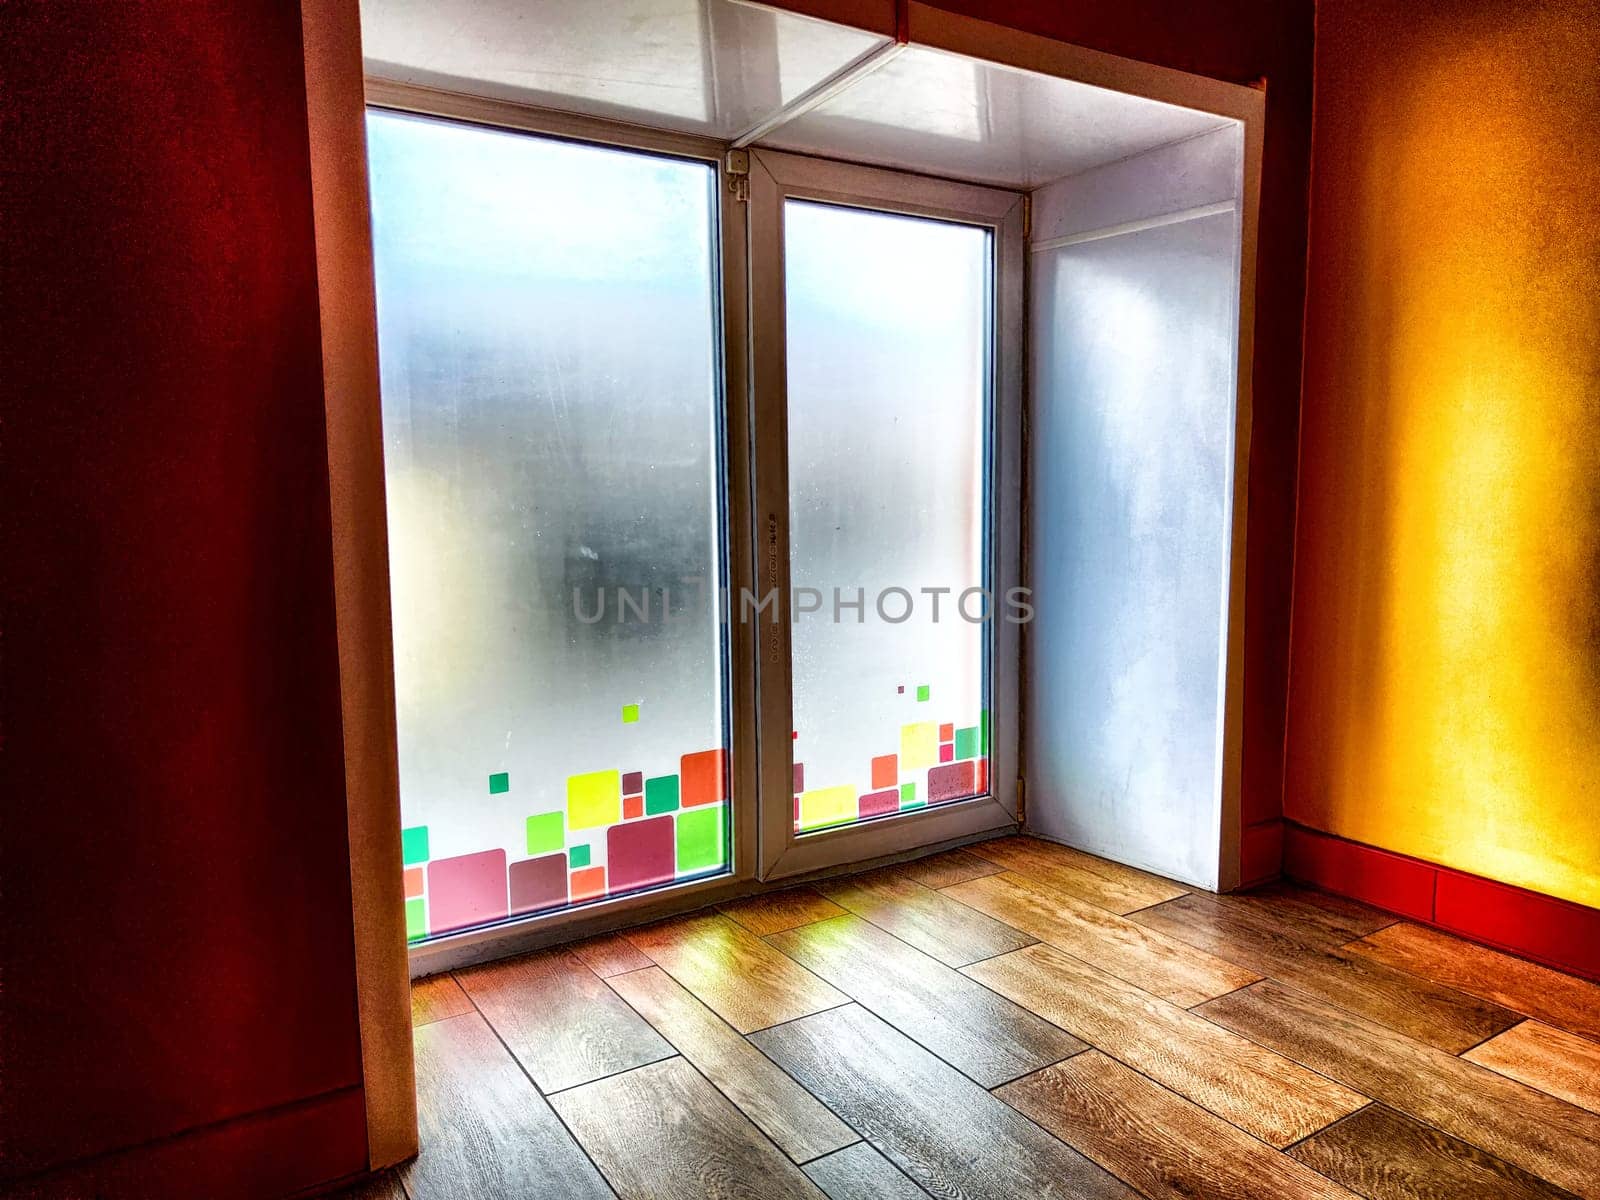 Window and floor. Background, texture. A frosted glass door adorned with vibrant squares allows diffused light into a room with wooden floors